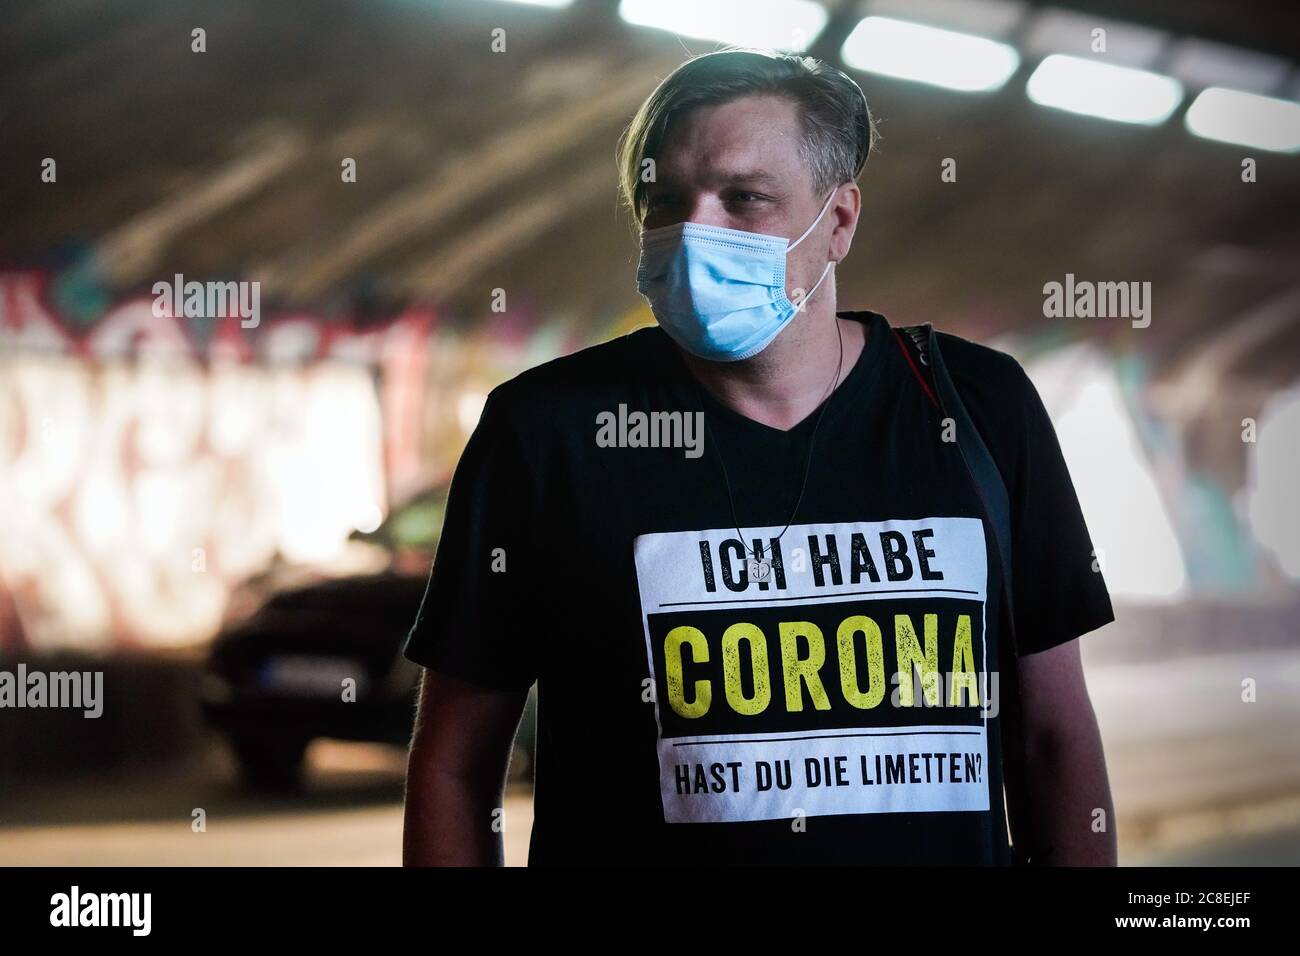 Duisburg, Germany, July 23rd, 2020: Man with a face mask is wearing a t-shirt that says 'I have Corona, do you have limes?'. This does not mean the virus Covid-19, but the Mexican beer brand Corona, which is drunk with lime in the bottle neck. Stock Photo